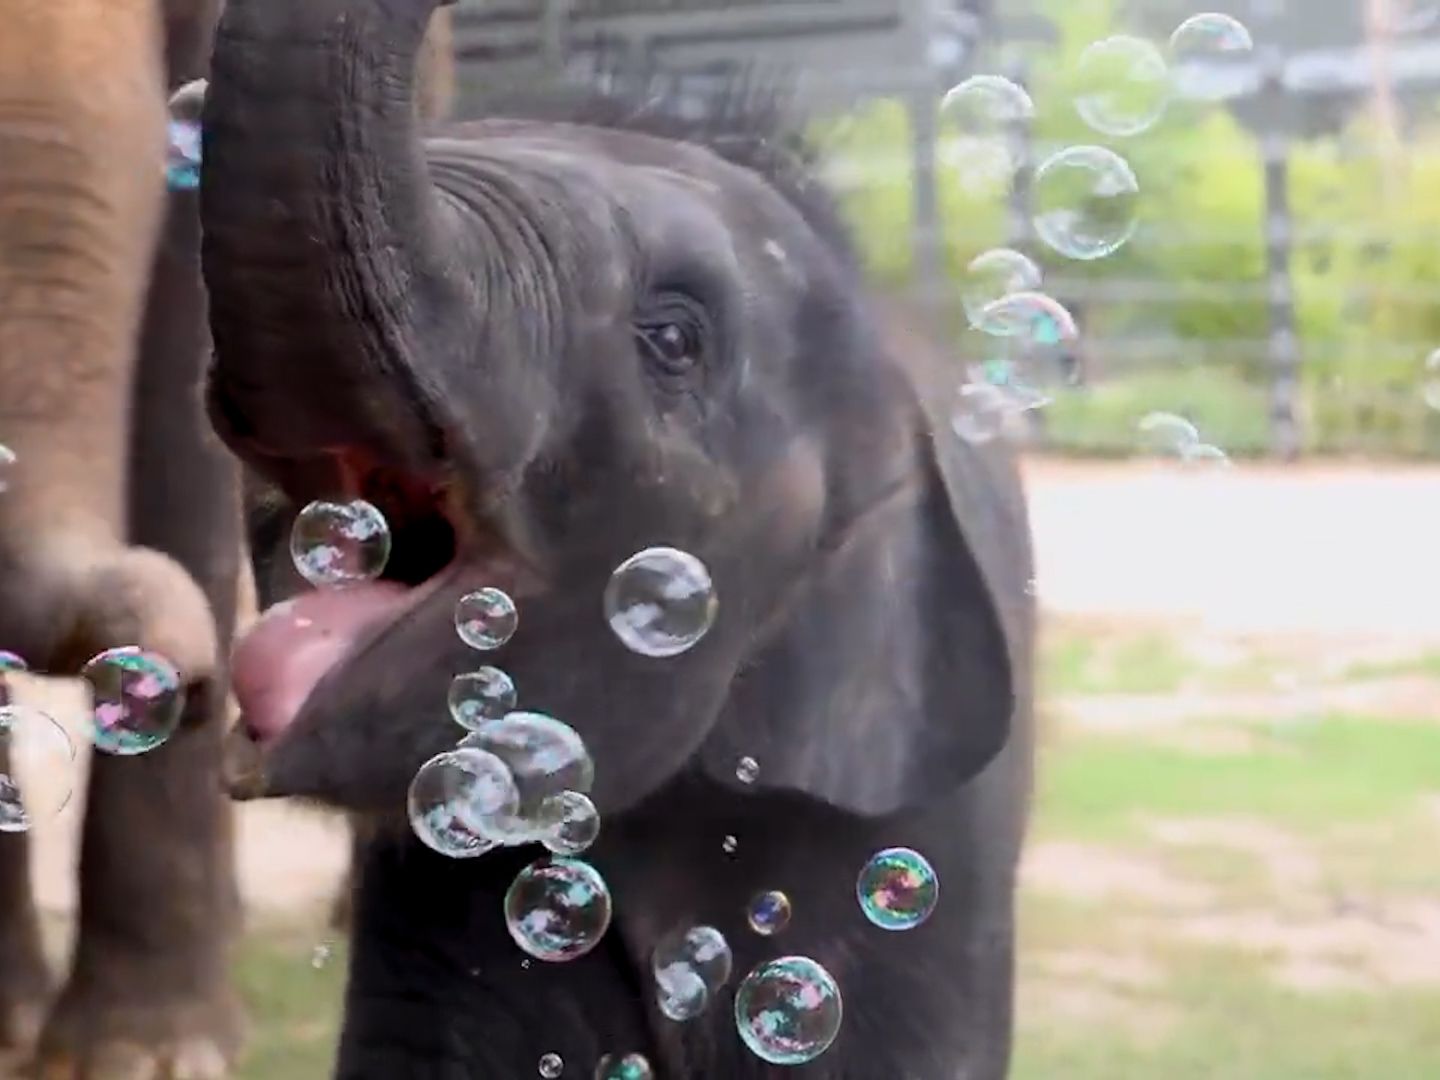 Stop what you're doing and watch this elephant play with bubbles | CNN